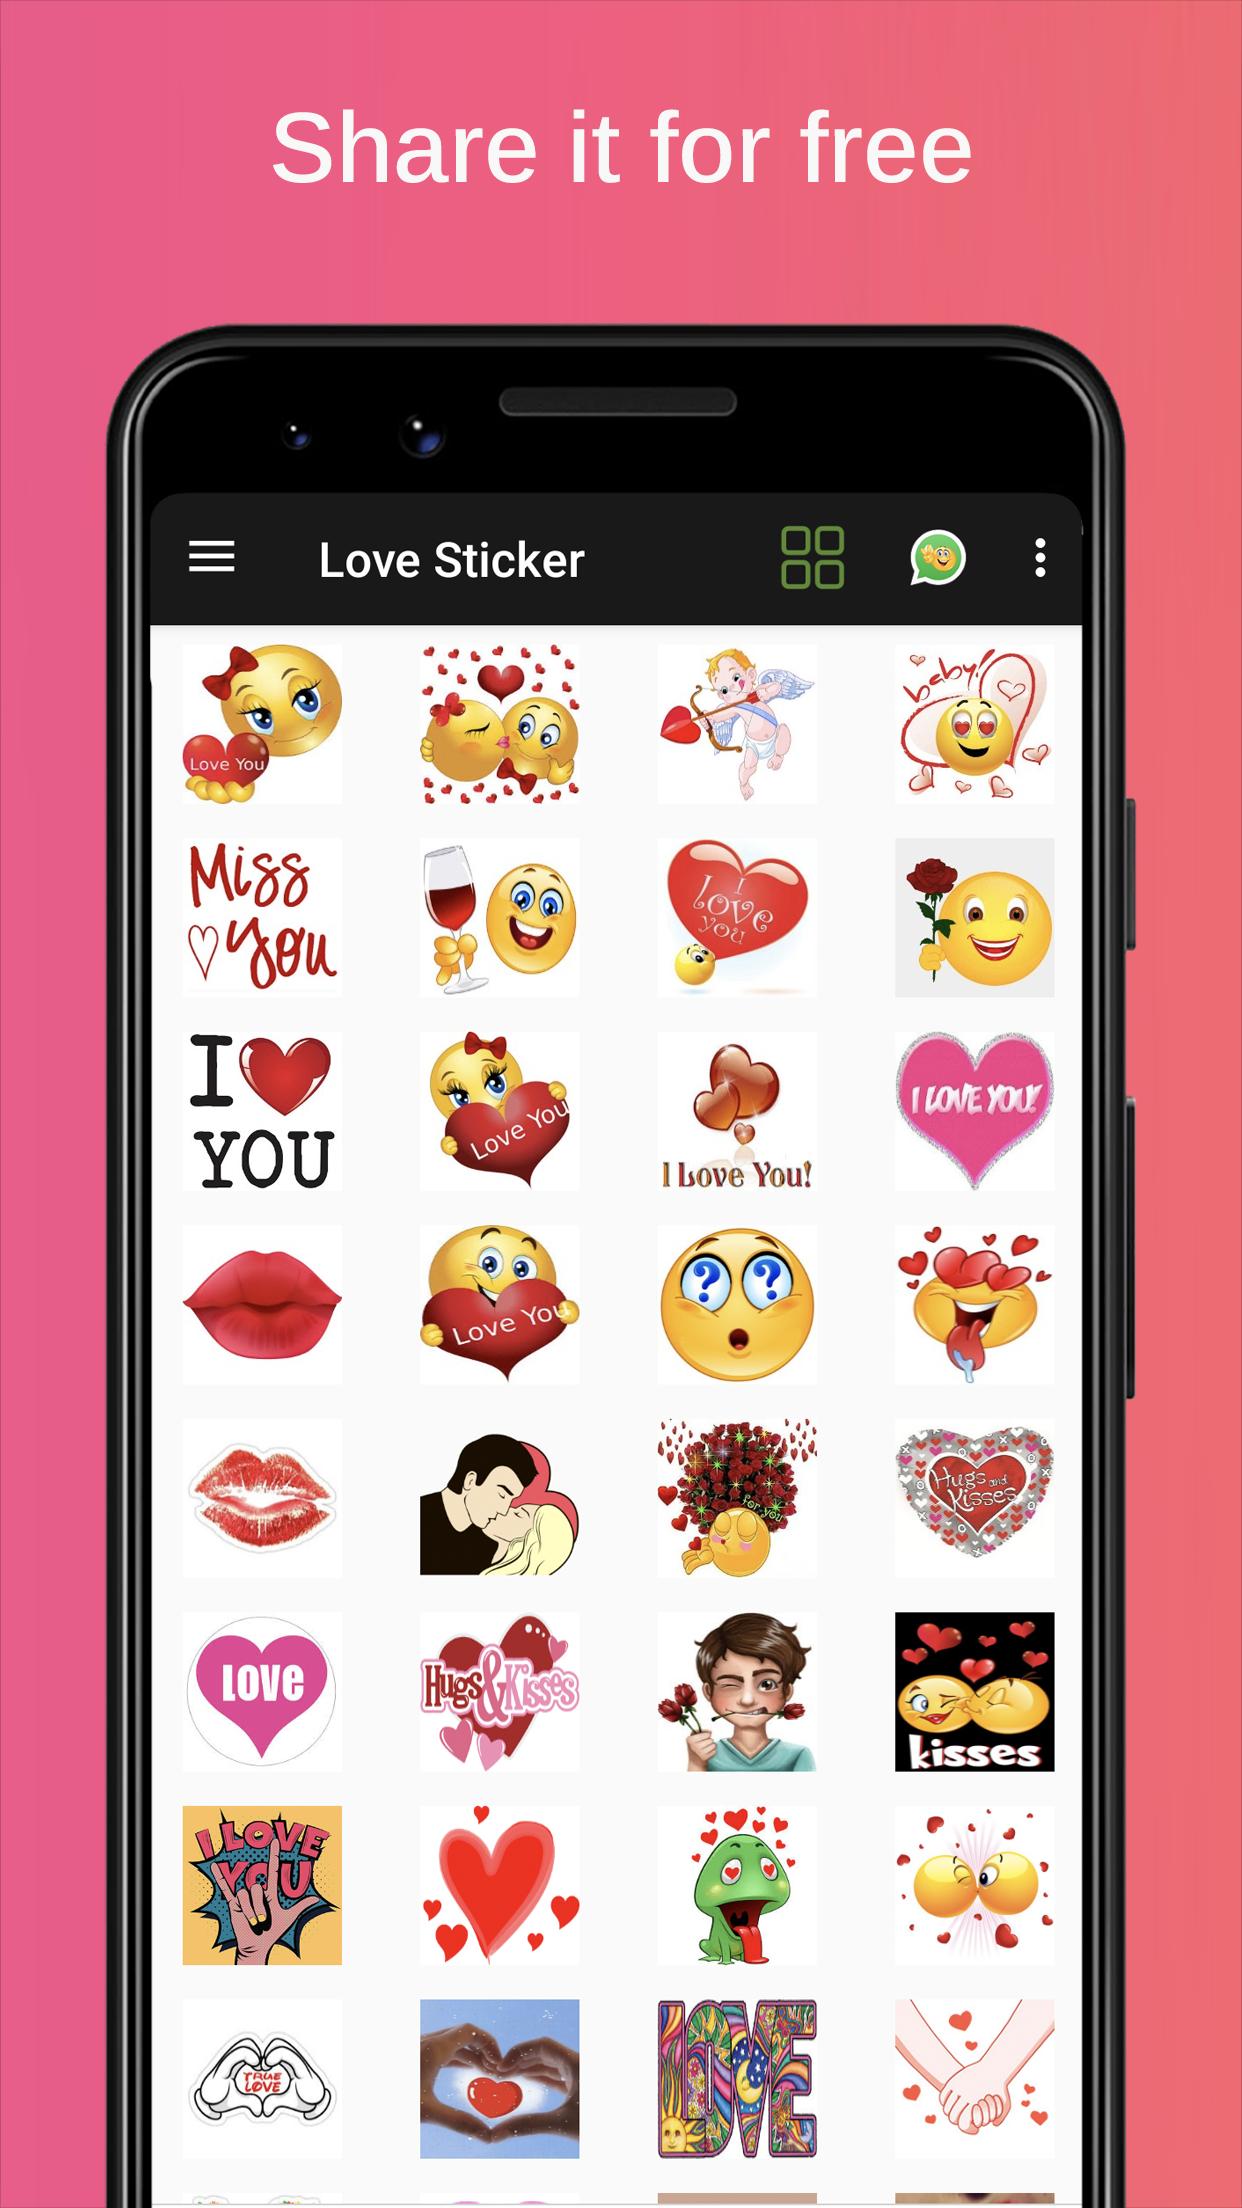 Love Sticker for Android - APK Download